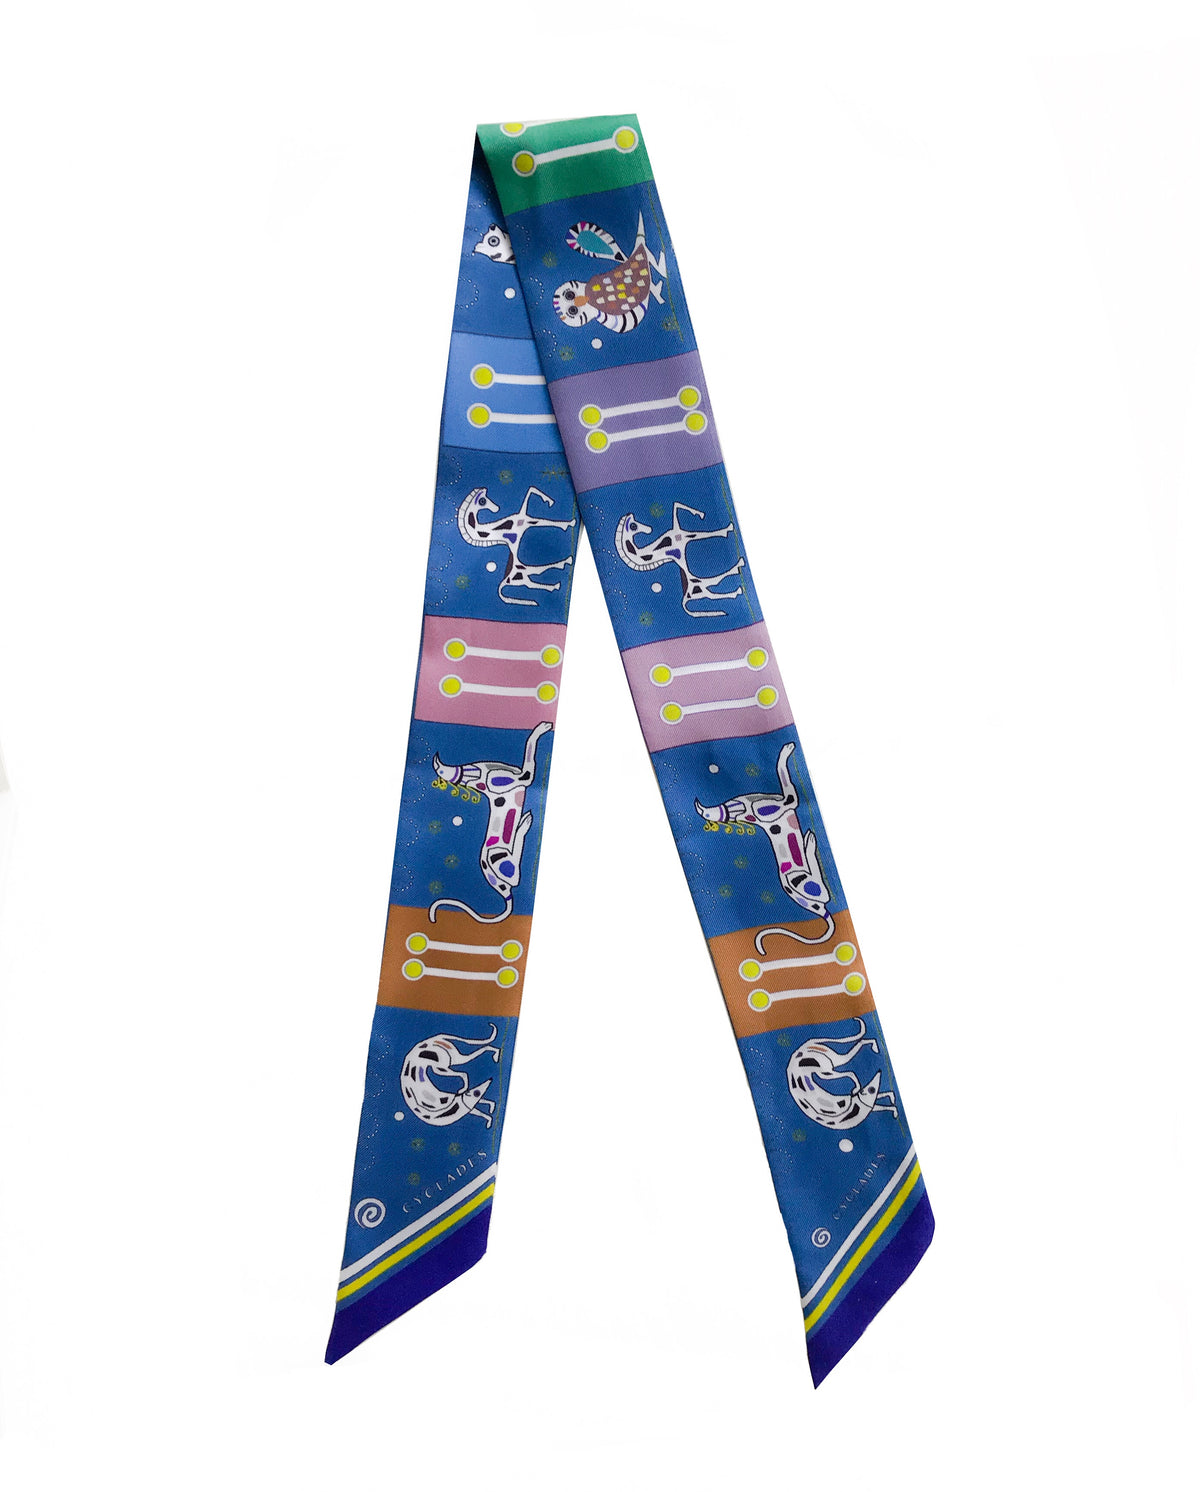 Cyclades Silk Scarves and Twillys